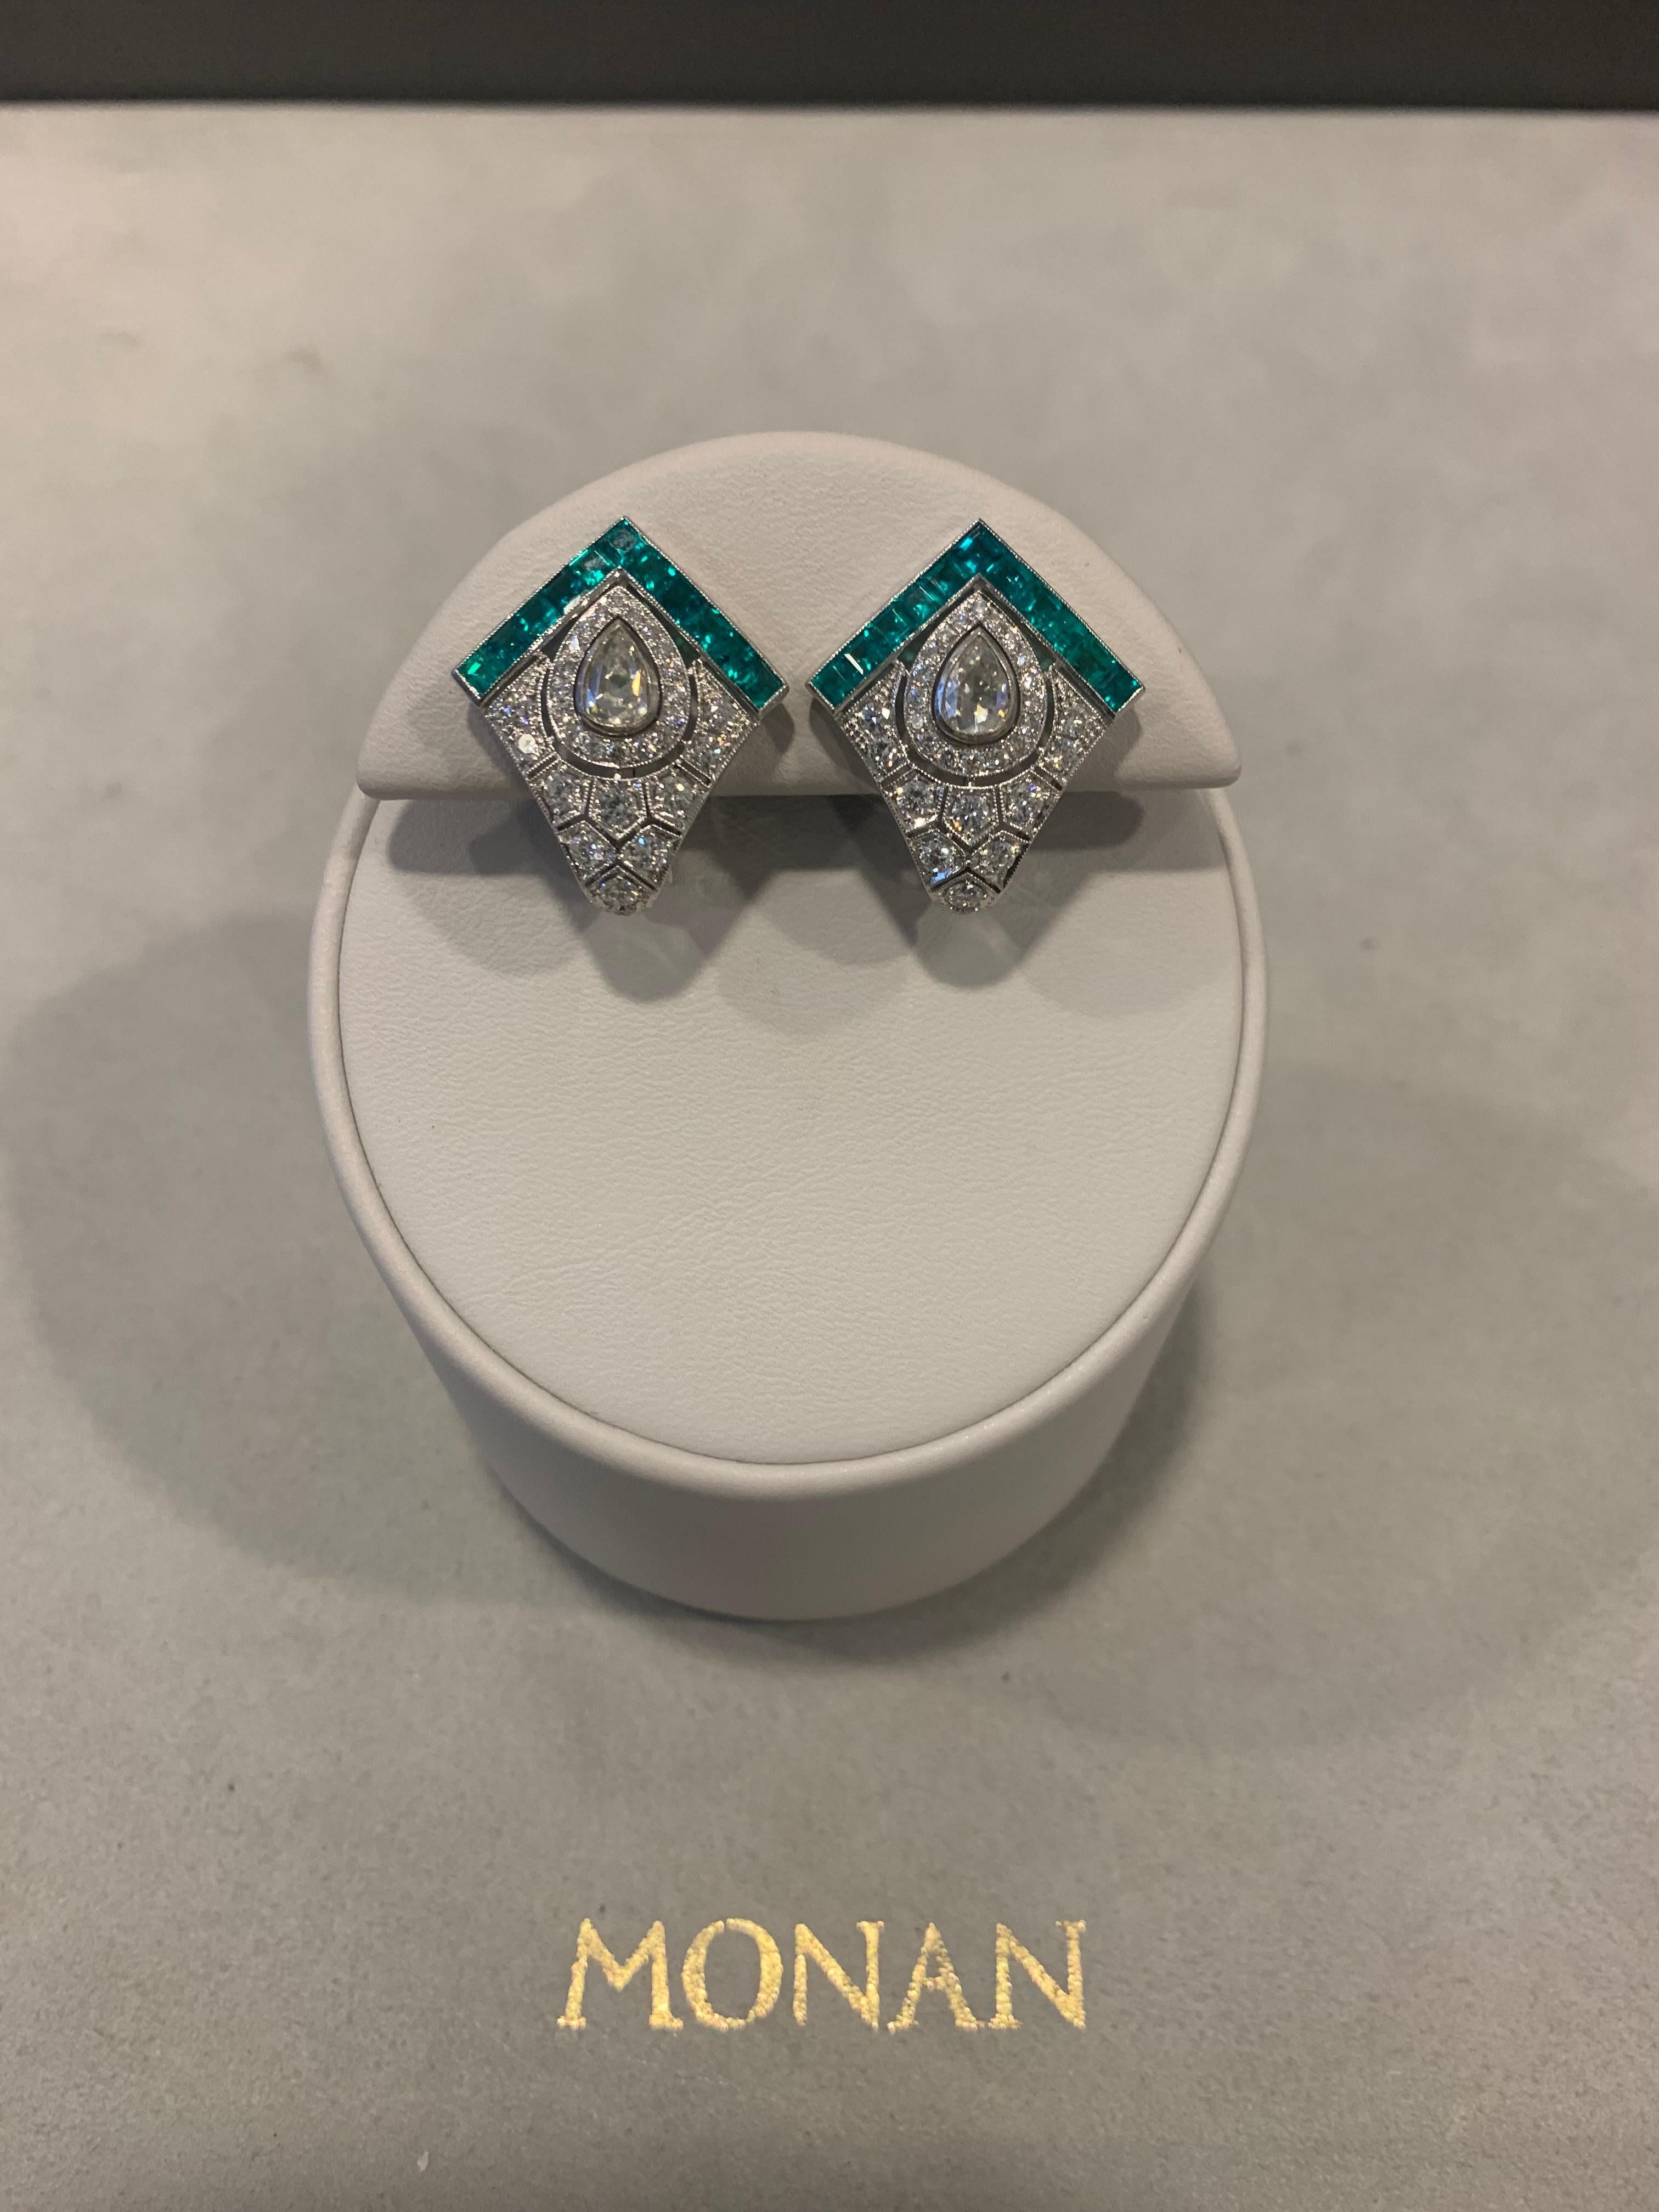 Monan 1.68 Carat Diamond and 1.22 Carat Emerald Art Deco Style Earrings In New Condition For Sale In Istanbul, TR